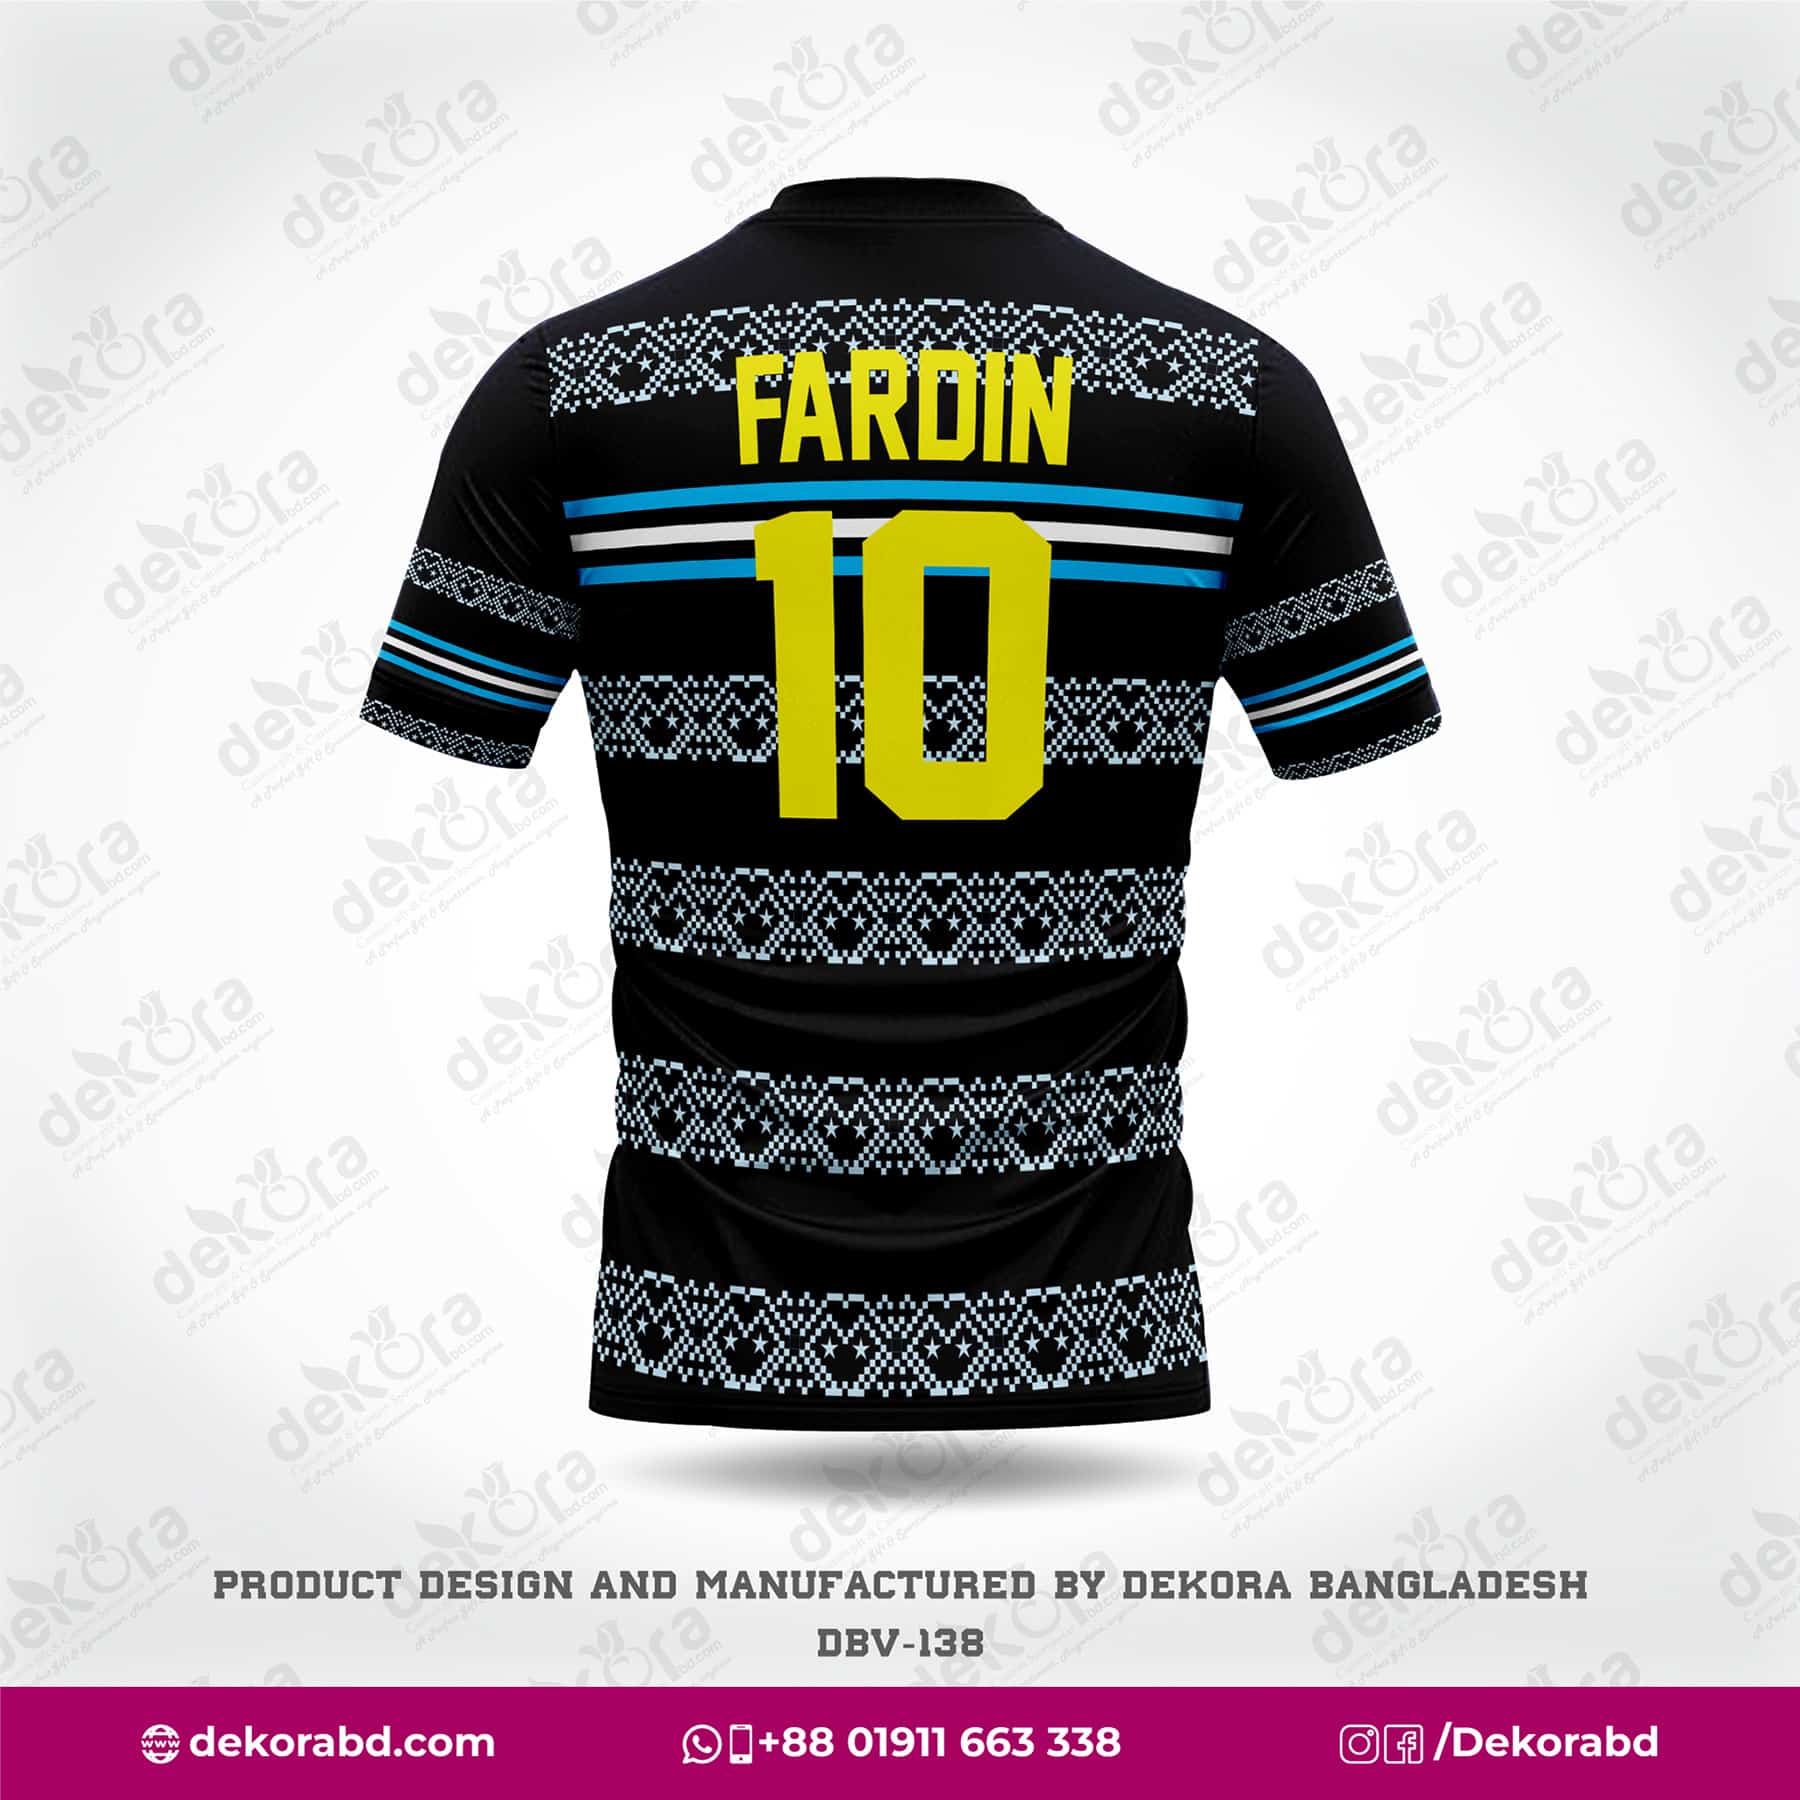 Tailored Made Customize Sports V-Neck Jersey; Sublimation jersey price in bd; Personalized Jersey in Melbourne; Custom Jersey price; Custom Jersey in bd; Personalize Jersey price; Customize Jersey Price in Bangladesh; Jersey; Best Jersey Company in bangladesh, Best Customize jersey price in bd; dekora; Custom Jersey design in dubai;